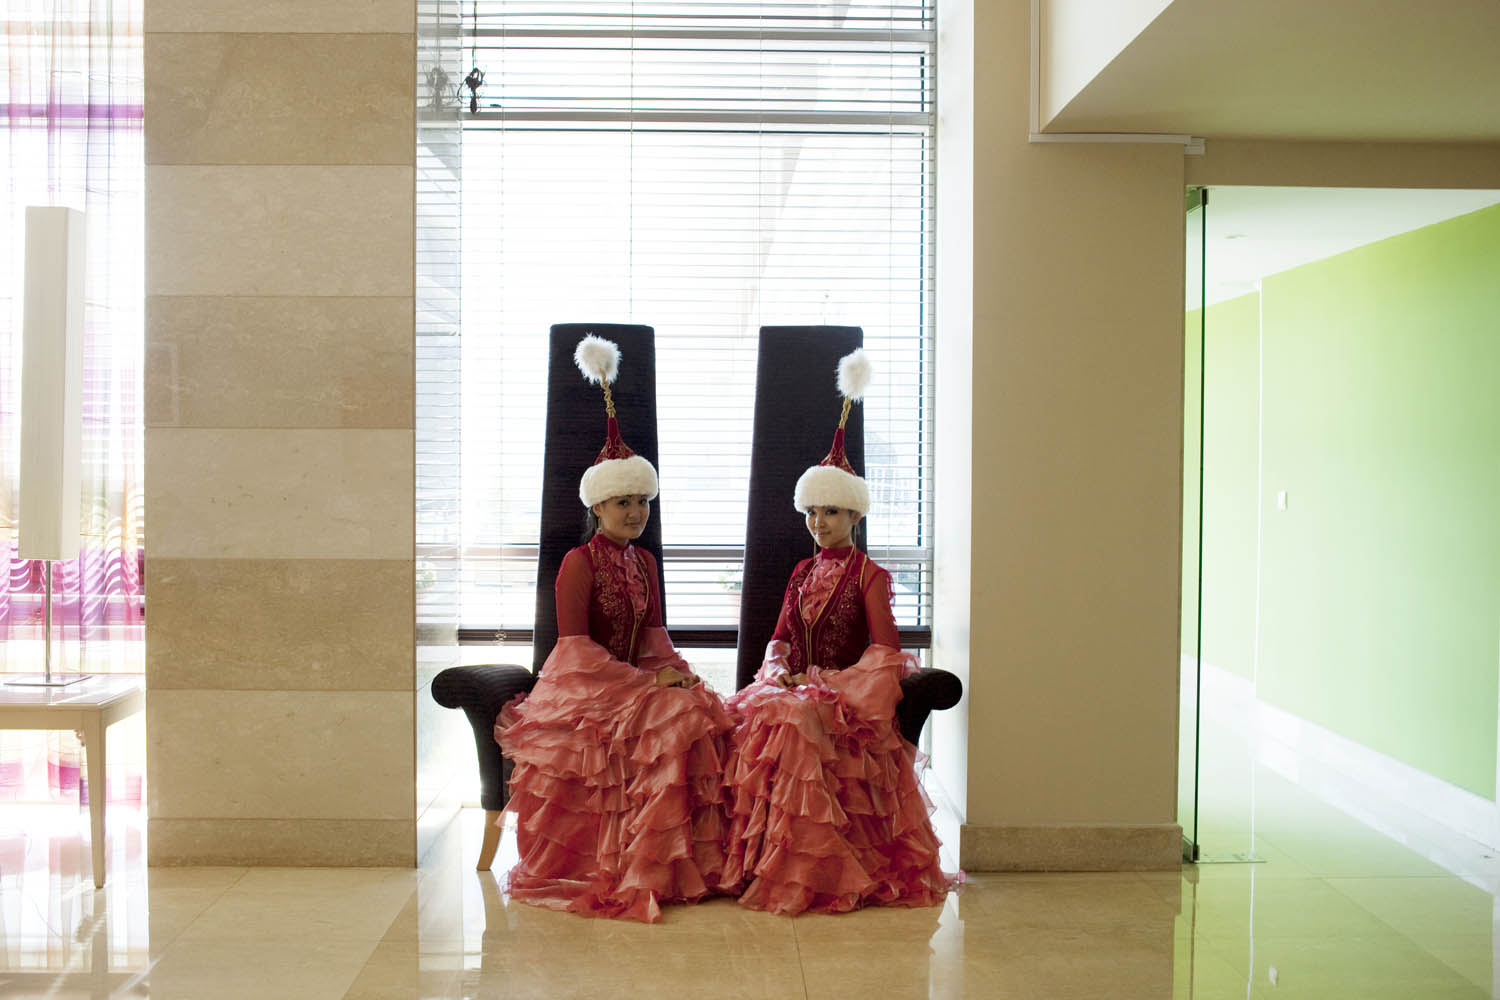 Women dressed in traditional Kazakh clothing sit waiting in the Renaissance hotel, where expat oil workers stay while visiting Atyrau on business.